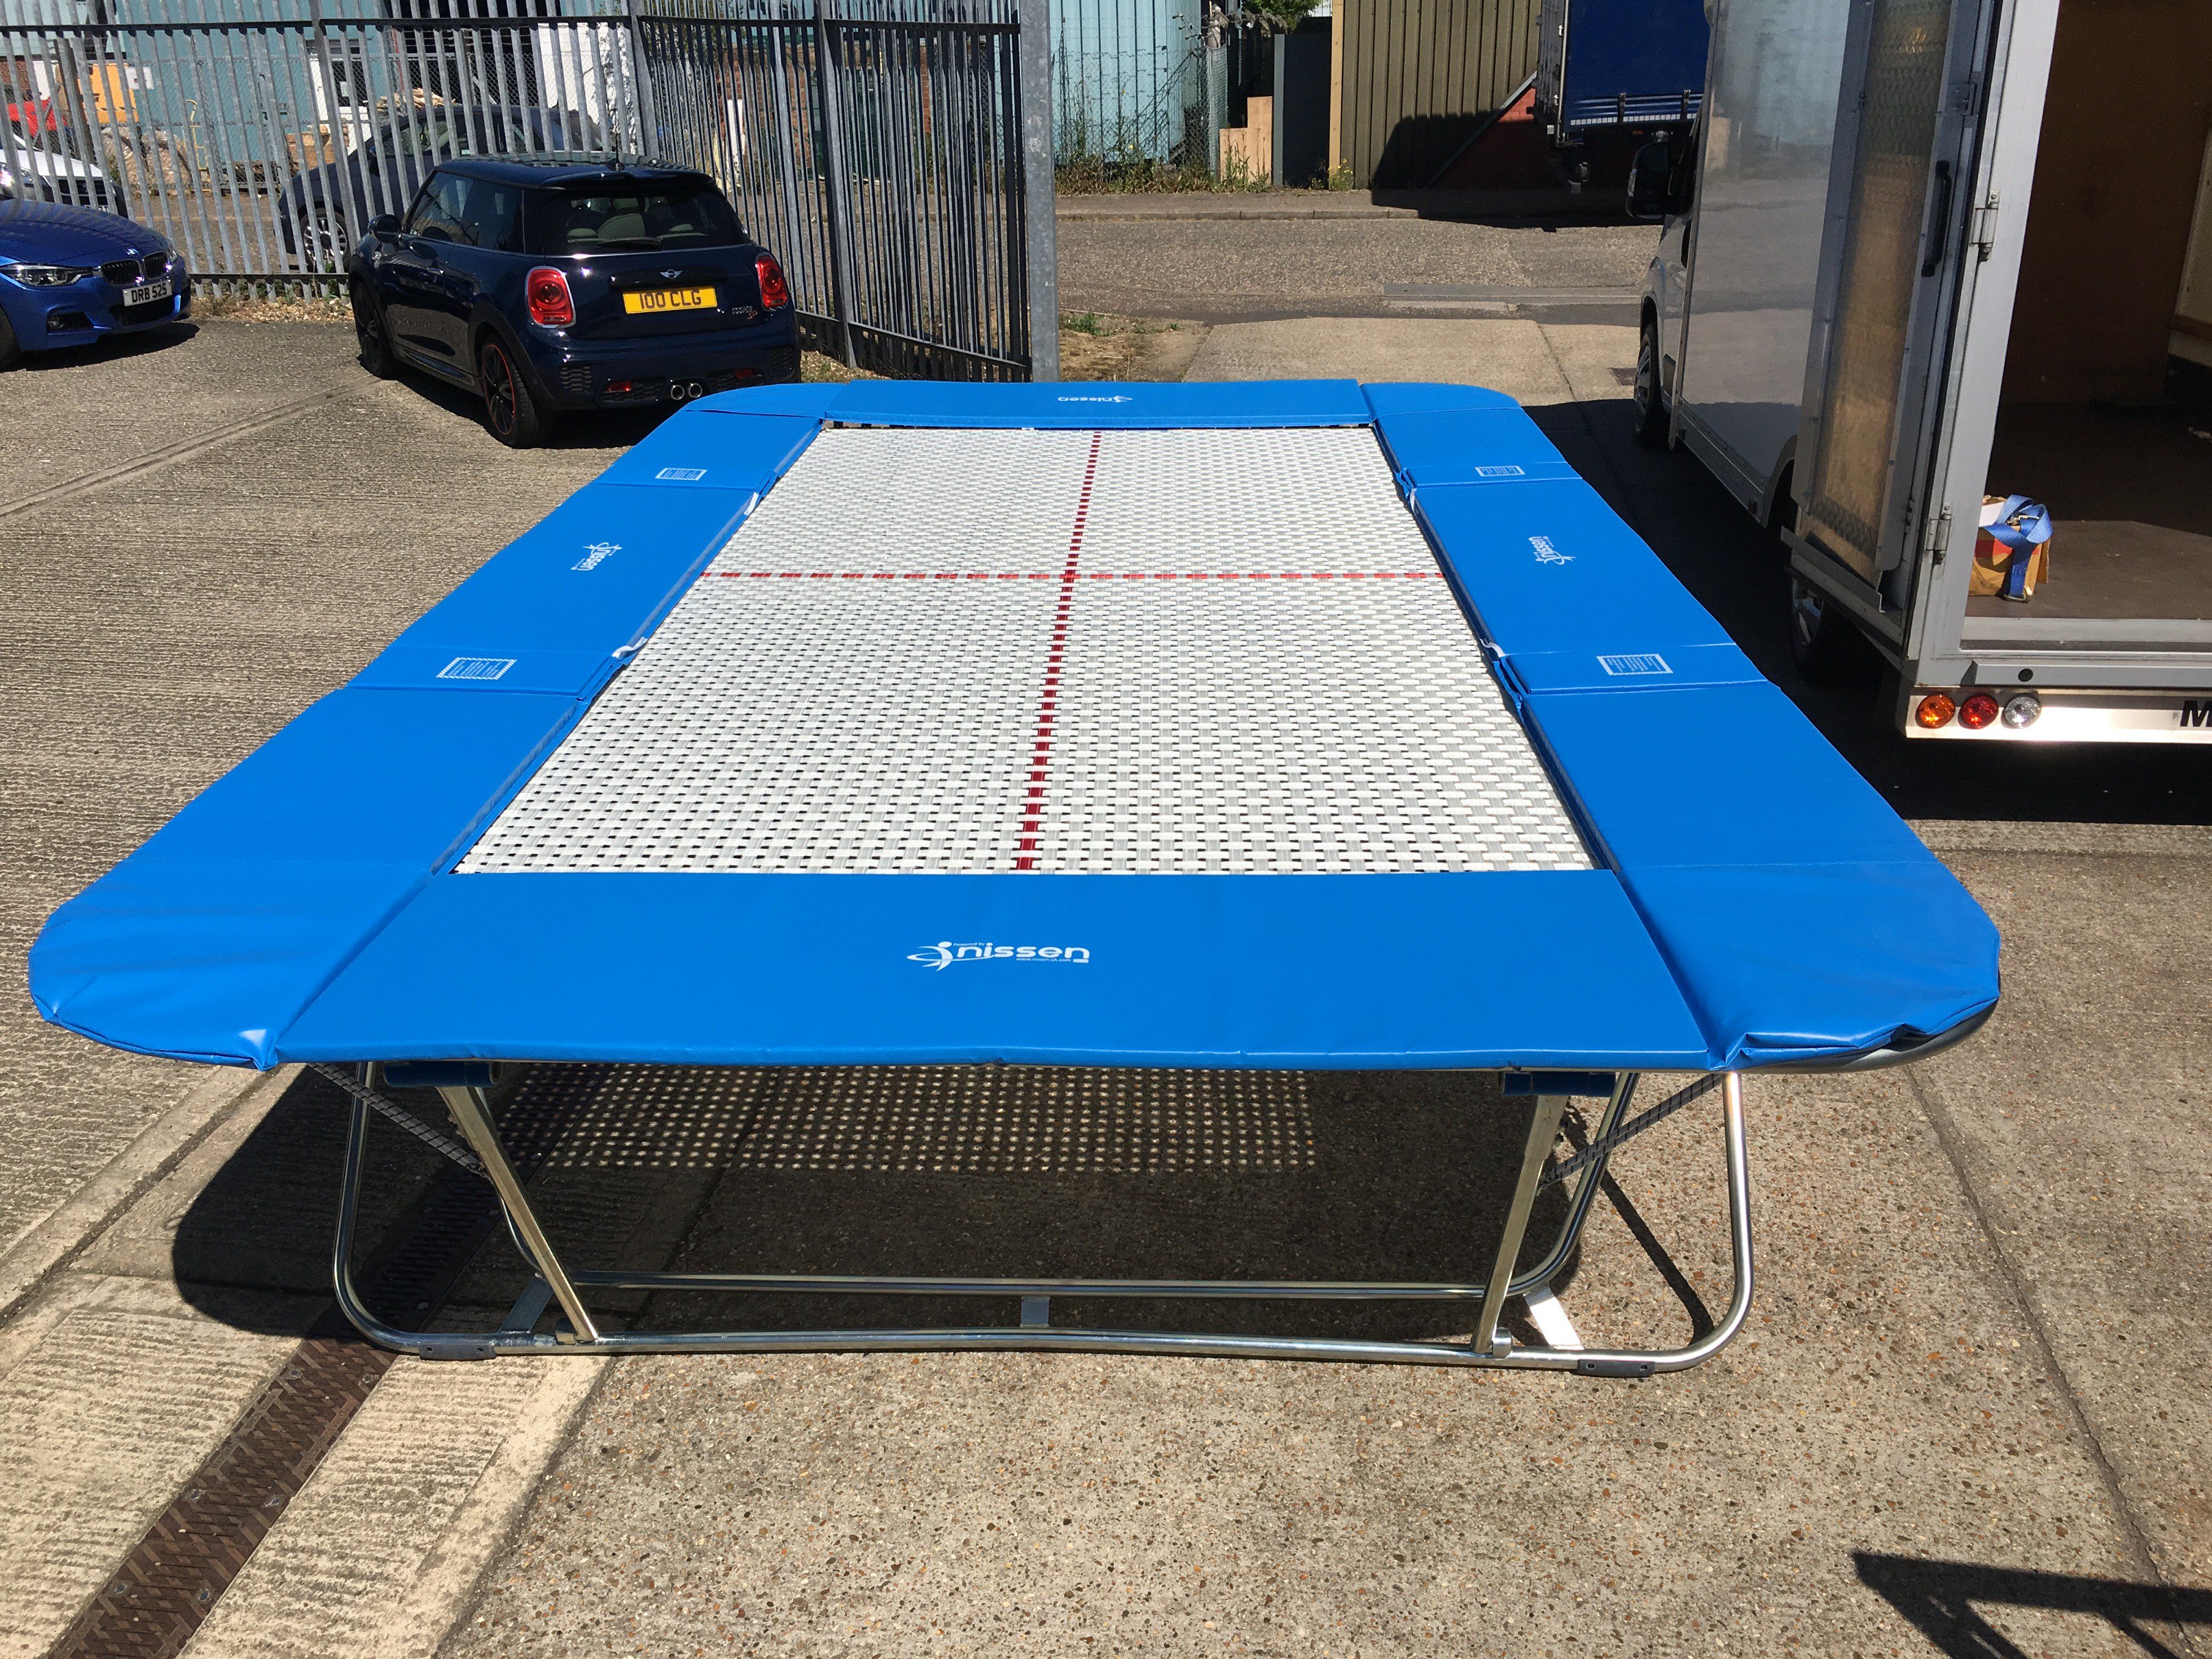 Marquee Præsident Uredelighed Nissen Leisure Ltd on Twitter: "We're just loading a #trampoline with a  25mm web bed for delivery tomorrow to a school in #Gloucester #ukmfg  #ukmanufacturing #manufacturinguk https://t.co/5myqaCk2xq" / Twitter